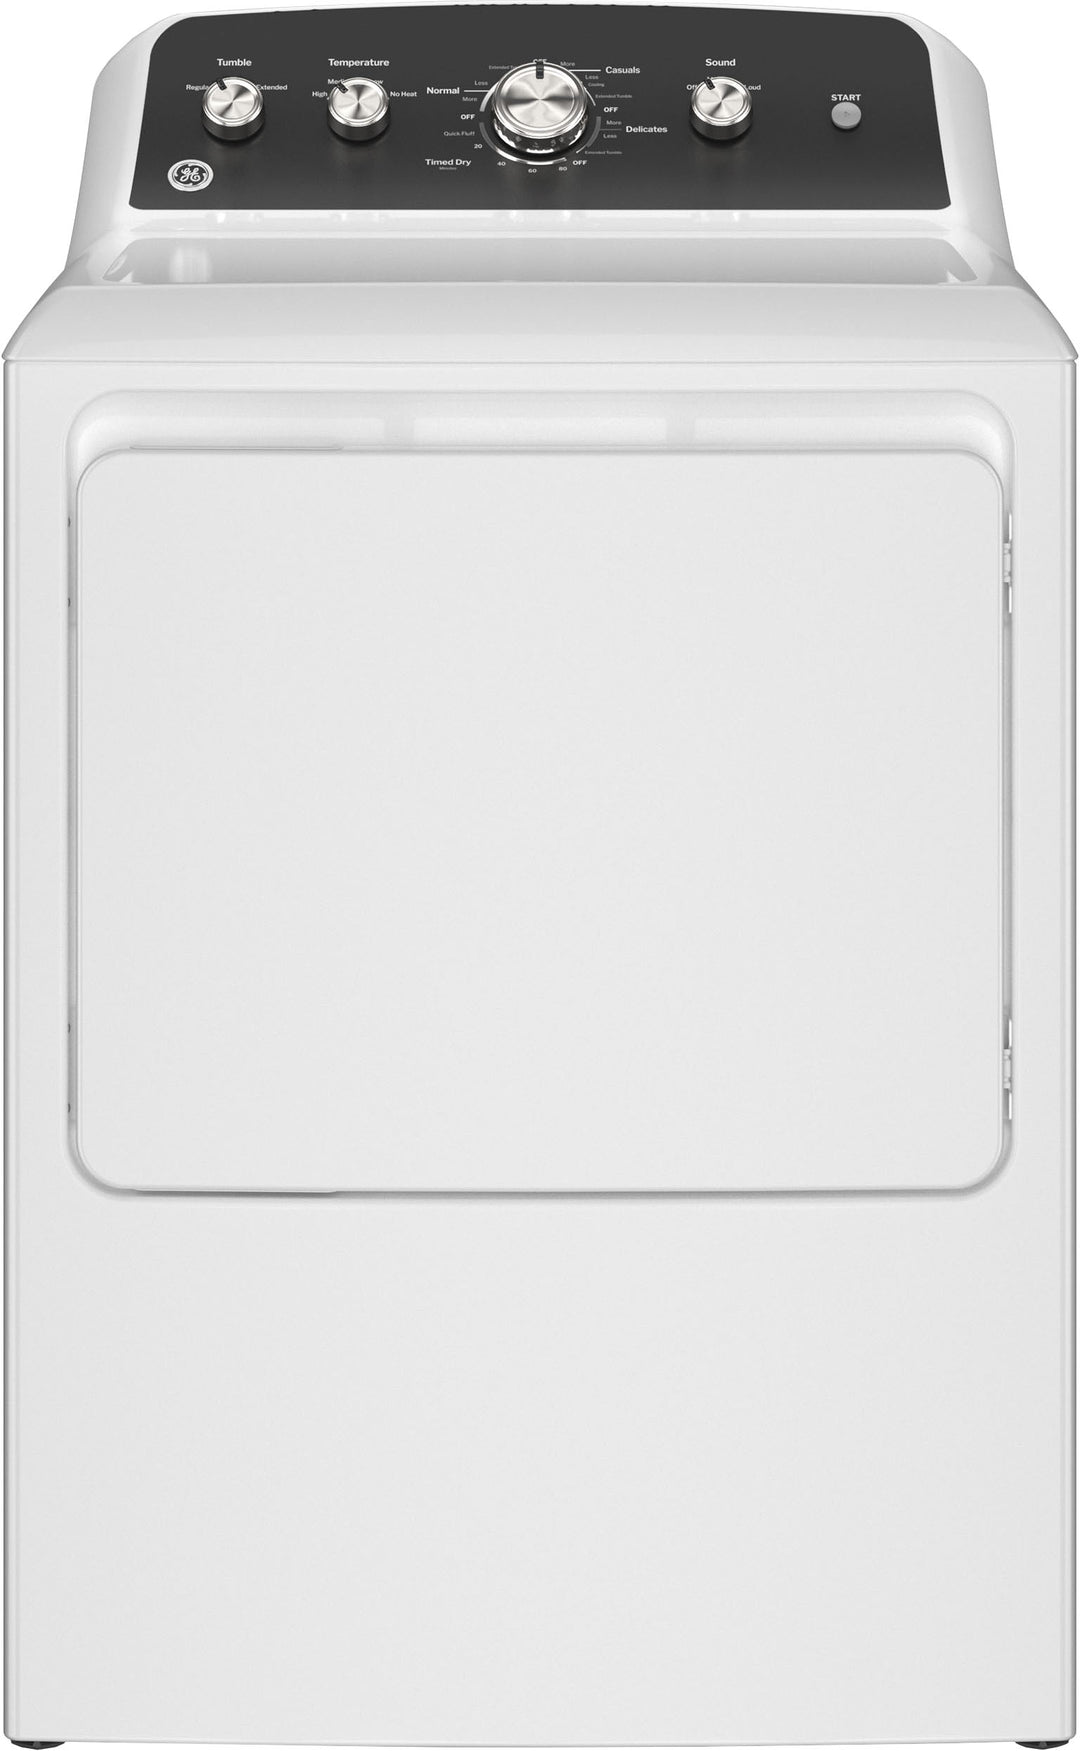 GE - 7.2 Cu. Ft. Electric Dryer with Long Venting up to 120 Ft. - White with Black_0